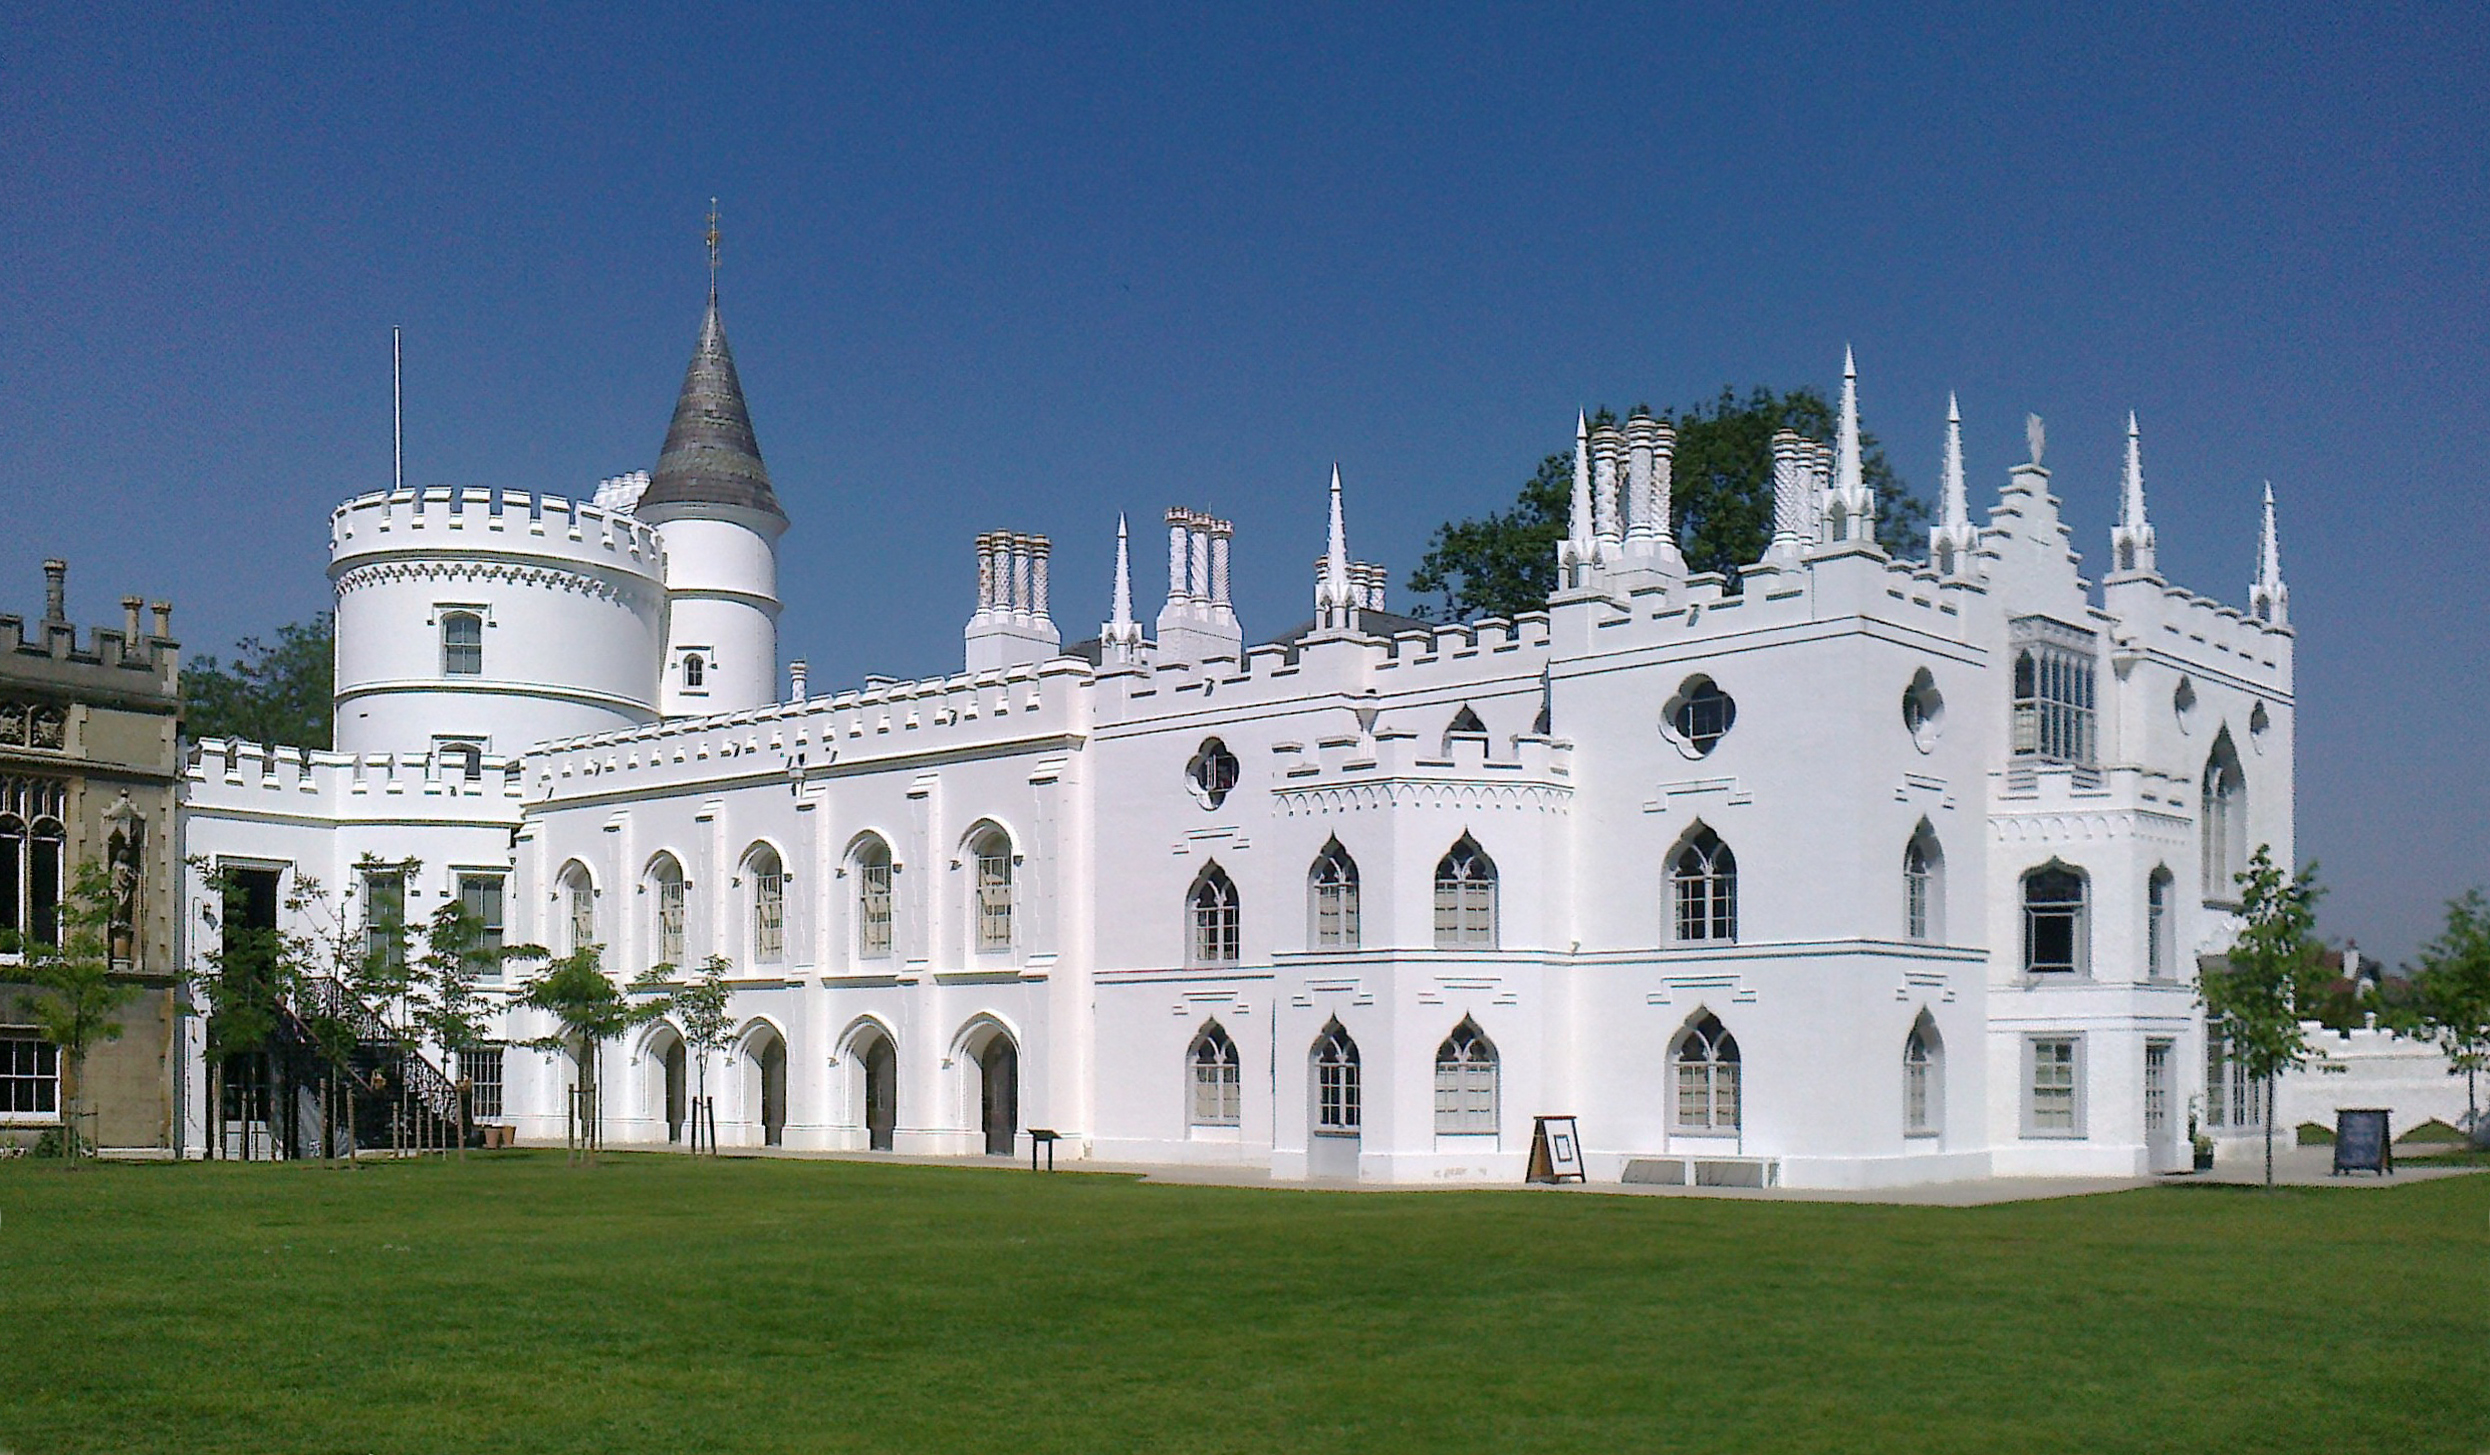 Strawberry Hill House, Twickenham, home to Horace Walpole, is an example of Queer Gothick architecture